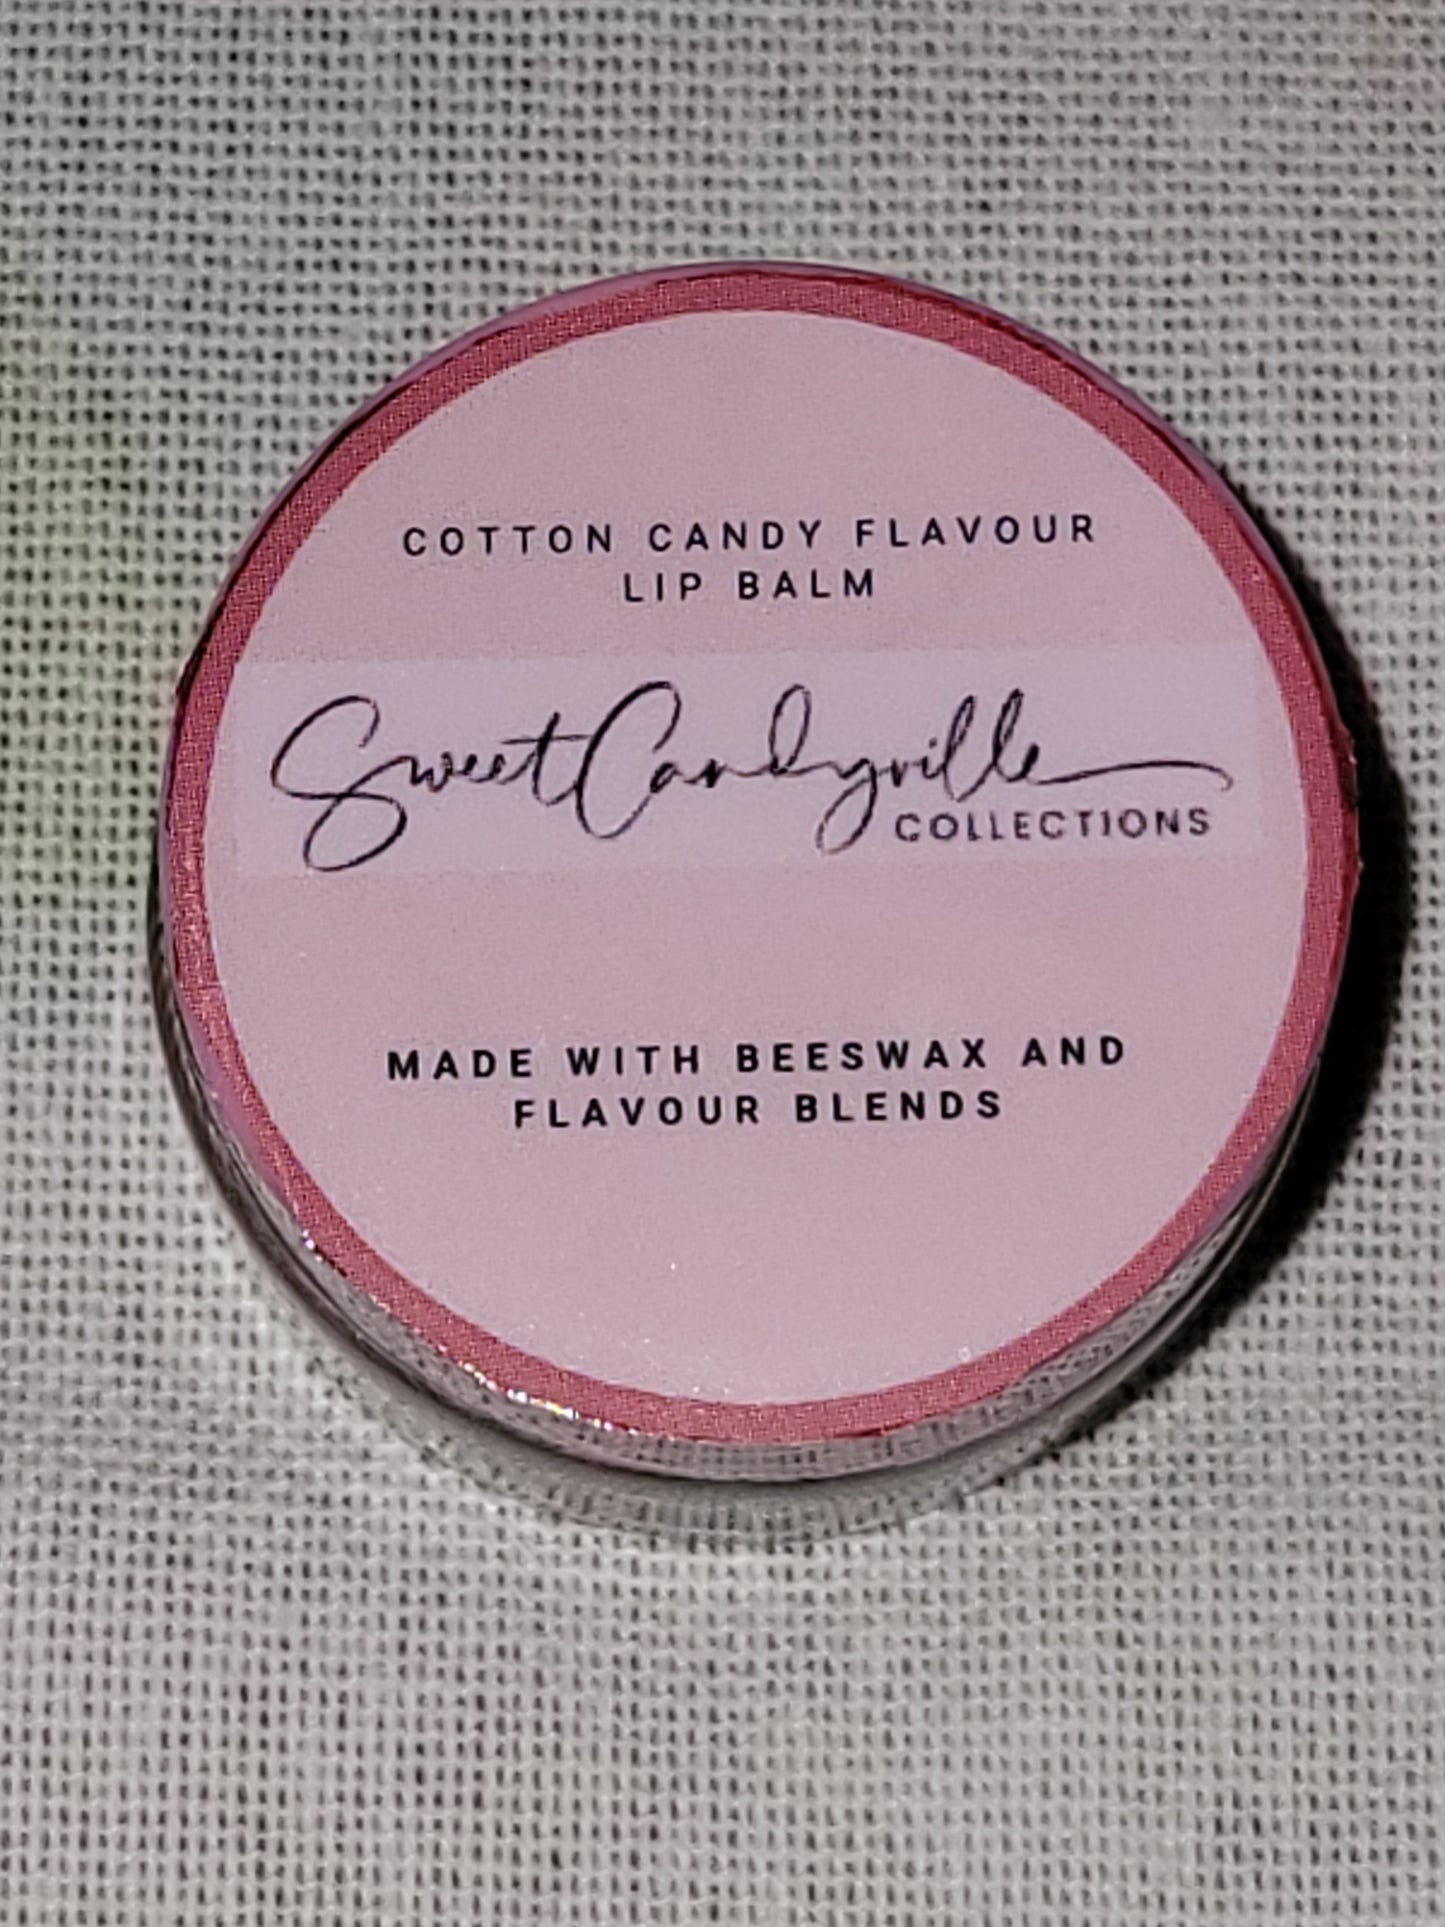 Cotton Candy Flavored Lip Balm